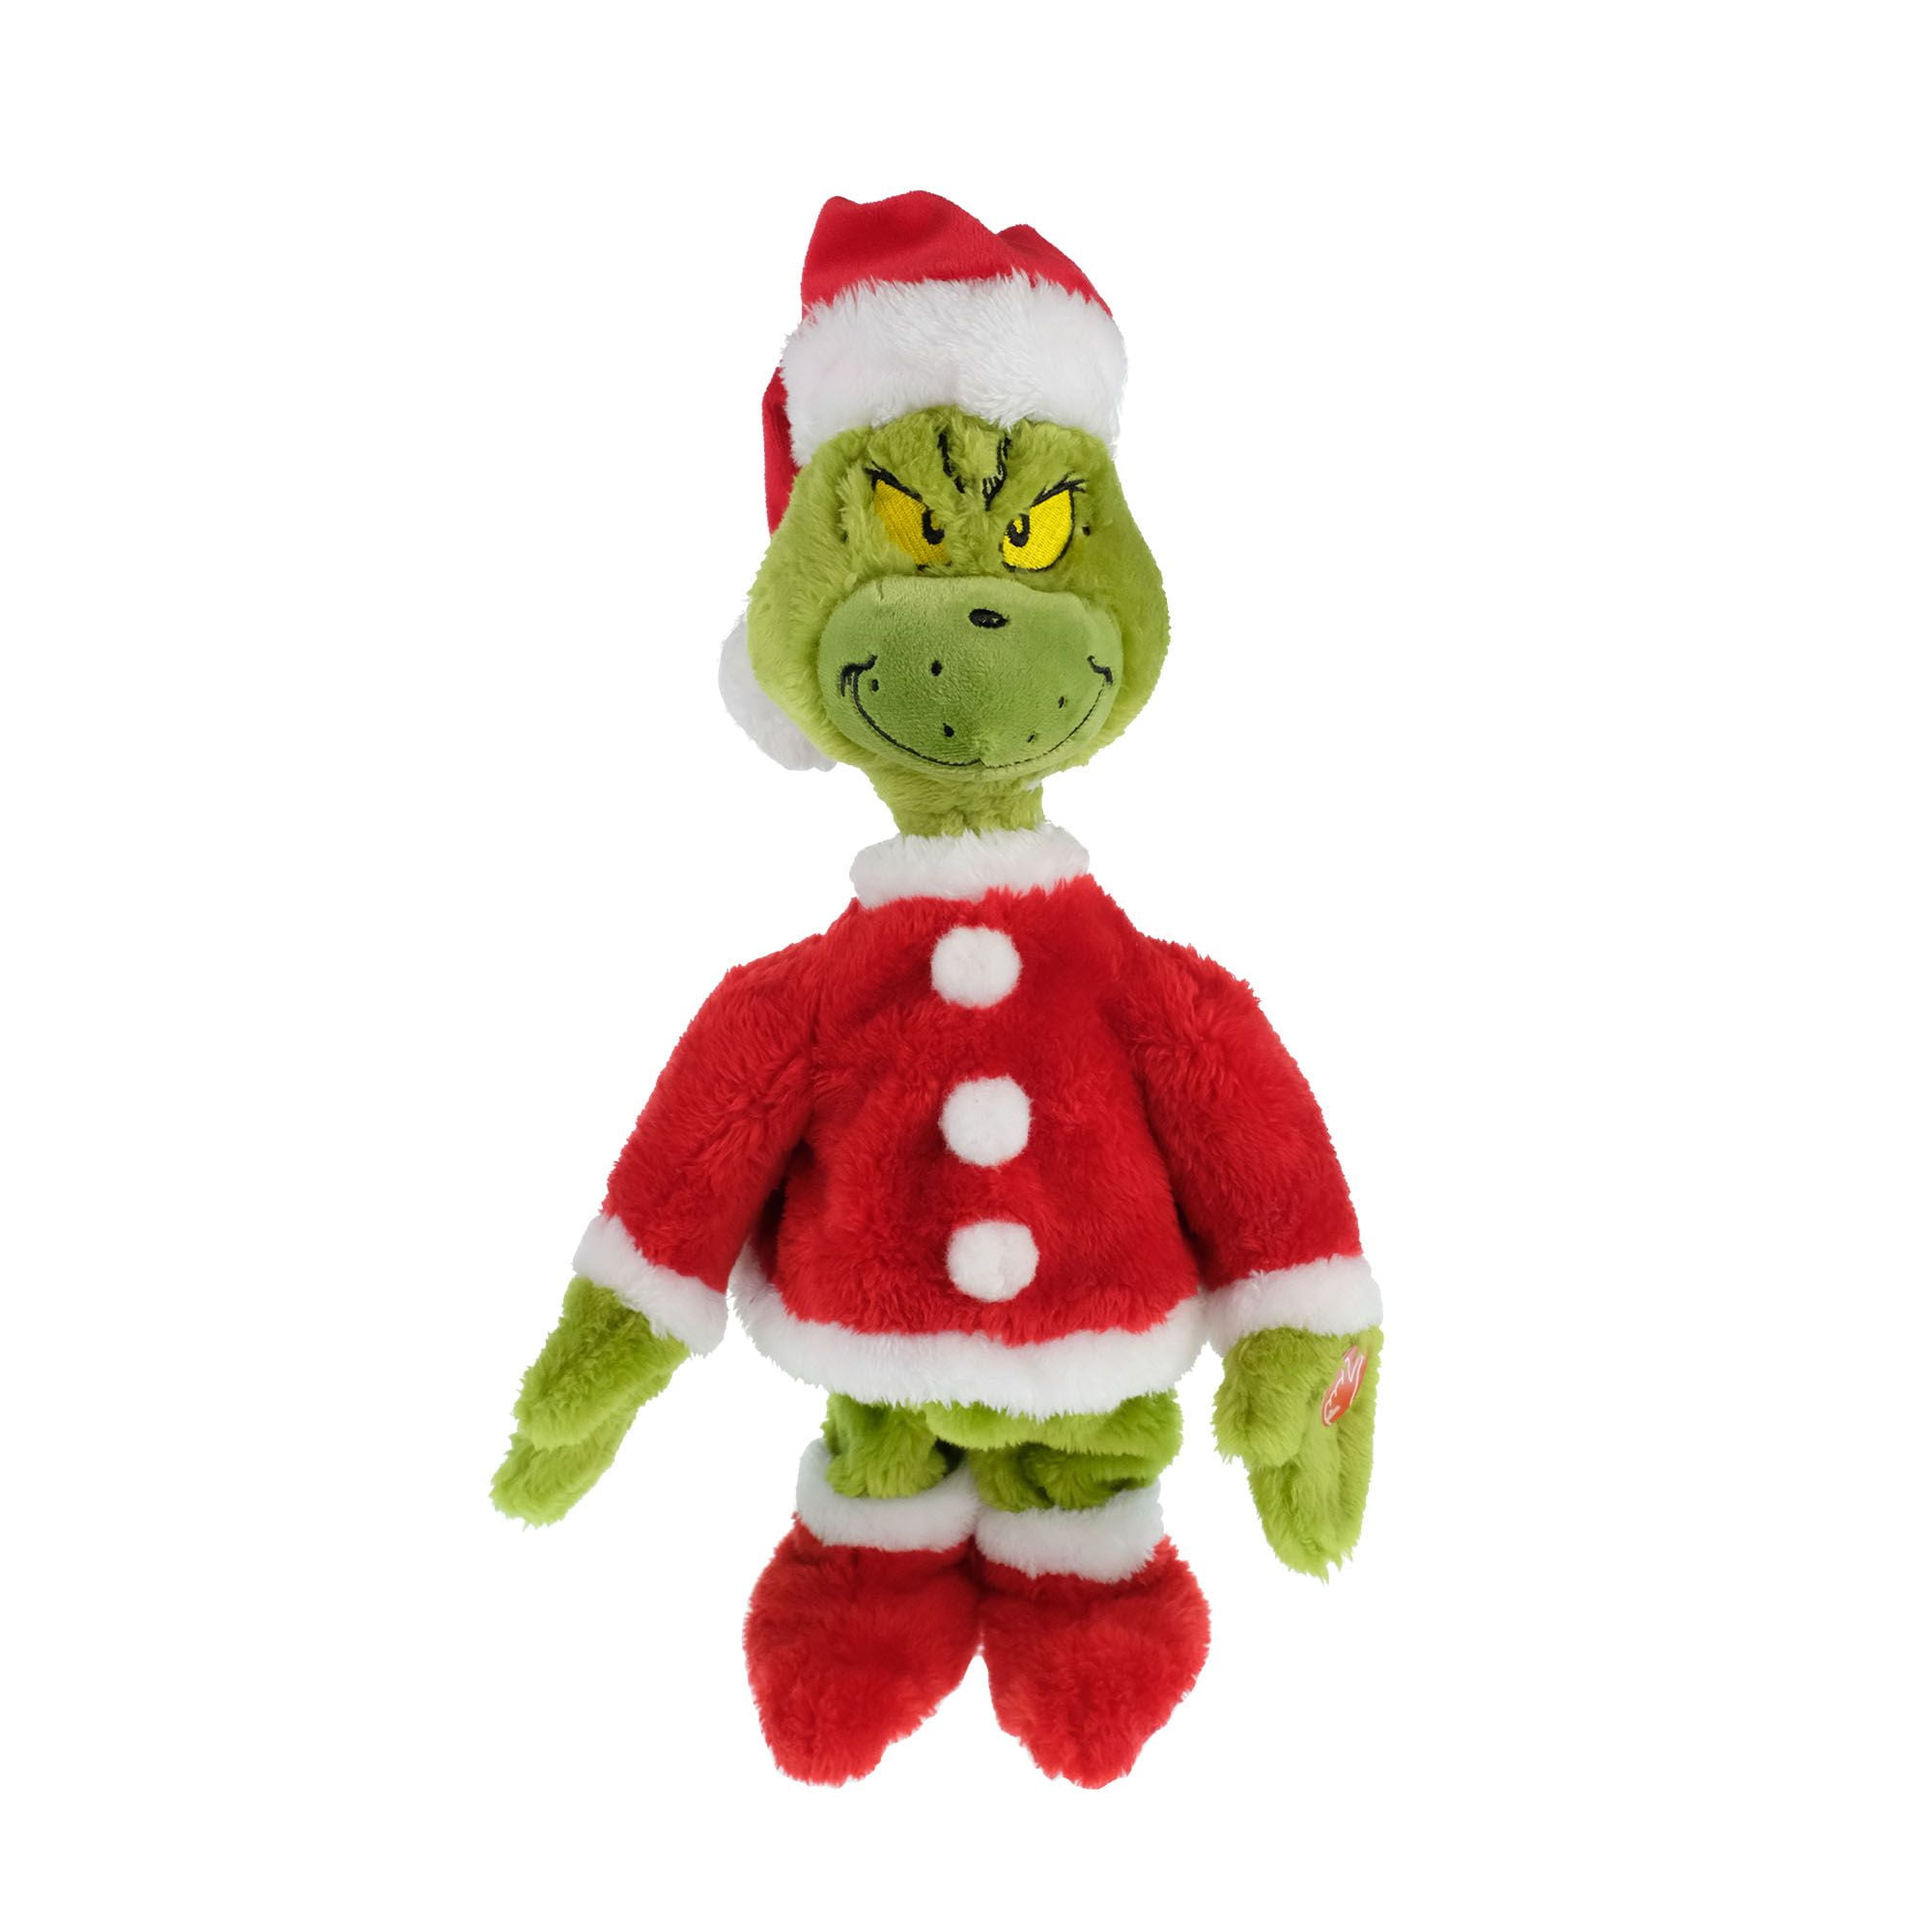 New Dr Seuss How the Grinch Stole Christmas with Santa Hat Plush Toy Gift 